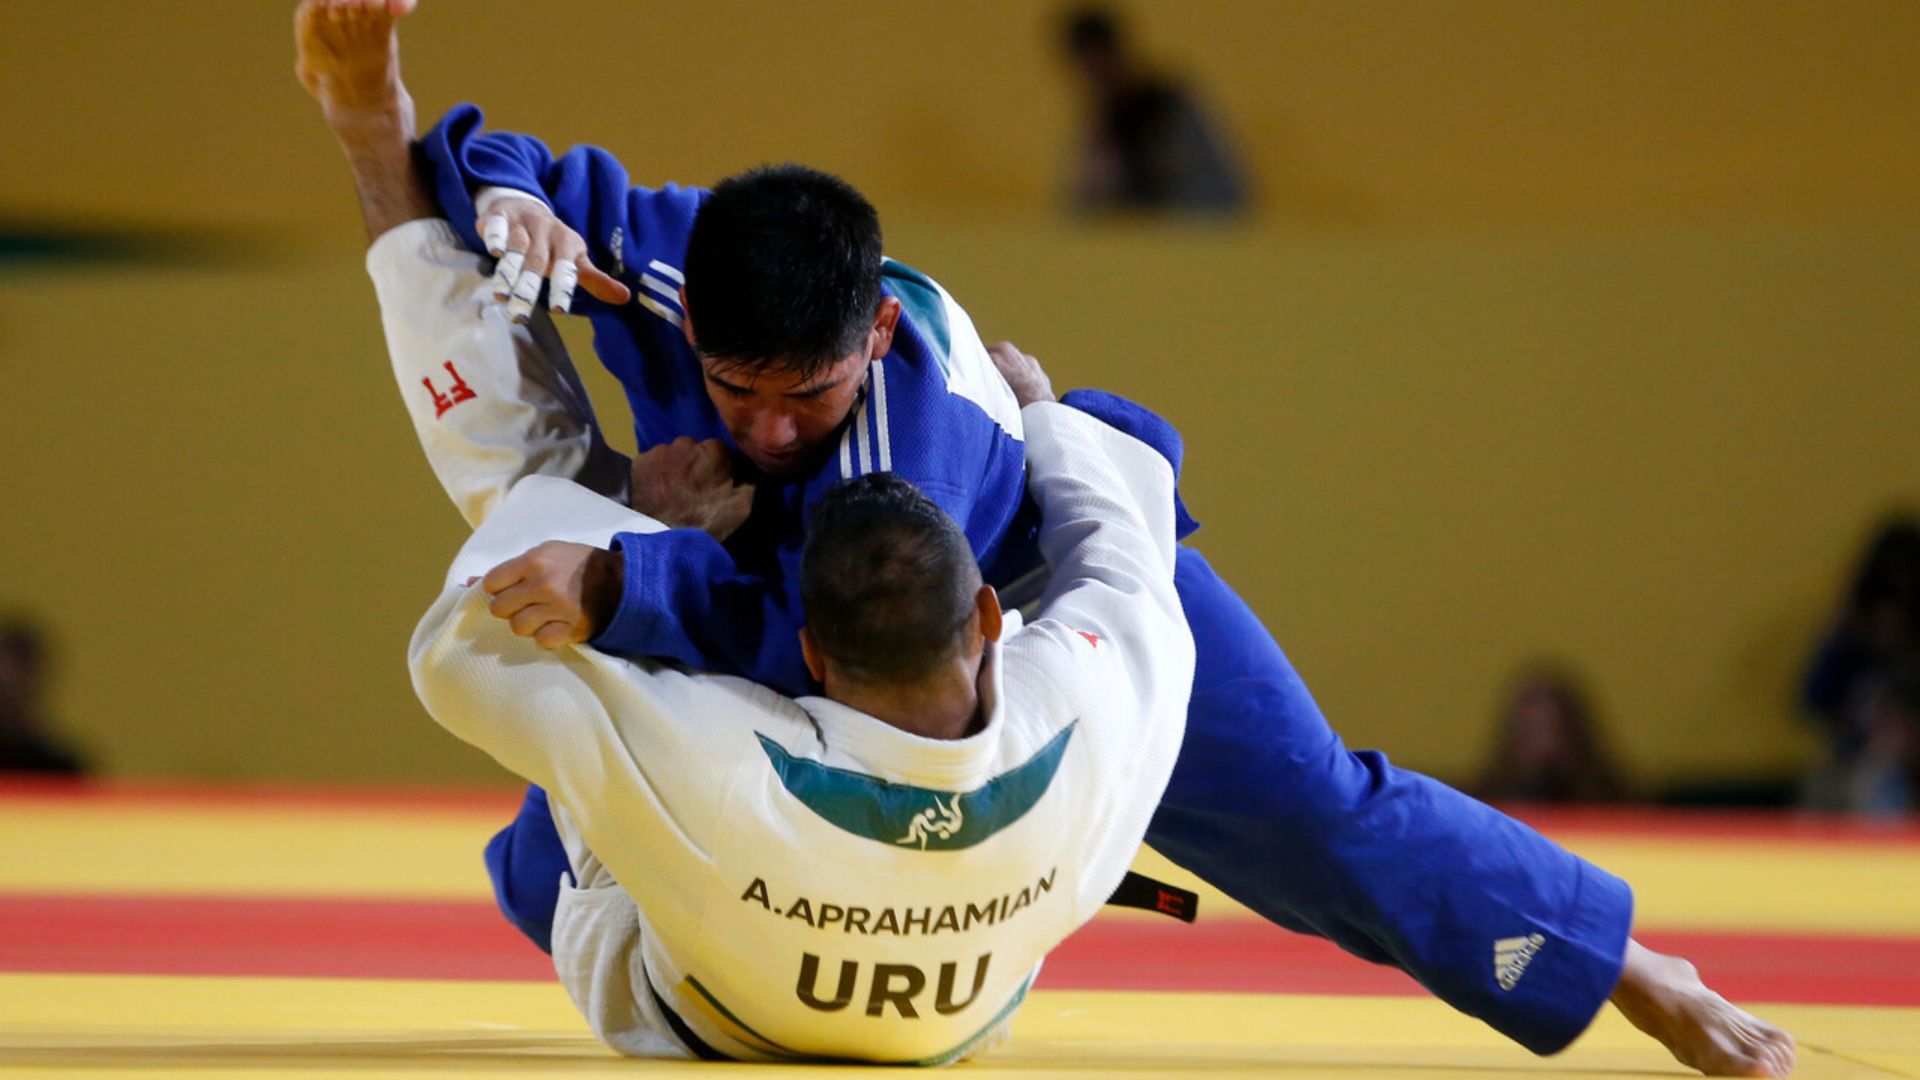 Judo: Chilean Pérez Secures Silver and Aims for Gold in 81 Kilograms